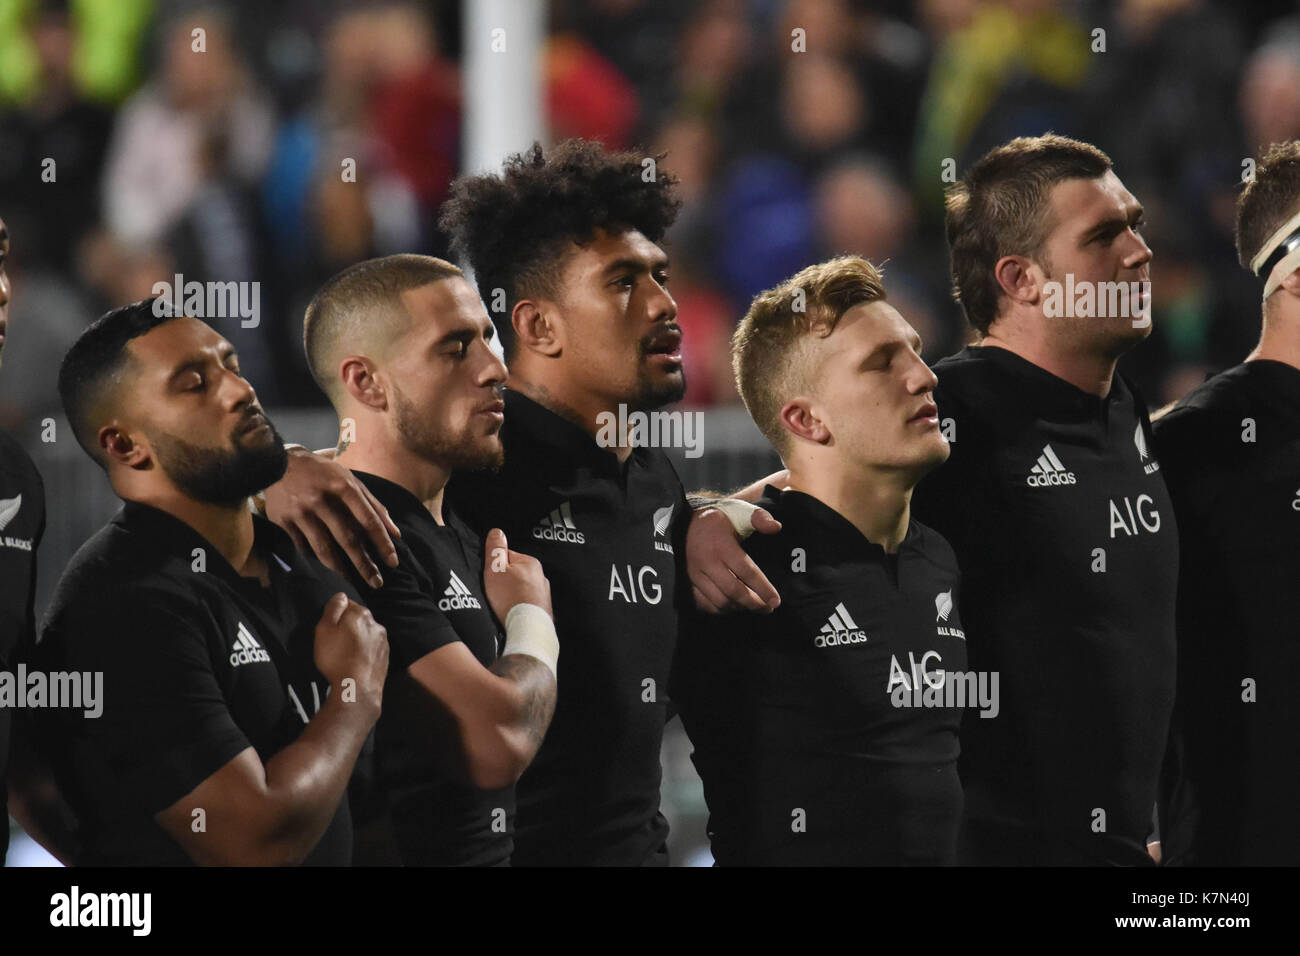 Auckland, New Zealand. 16th Sep, 2017. New Zealand national anthem before the Rugby Championship test match between the New Zealand All Blacks and the South Africa Springboks at QBE stadium in Auckland on Sep 16, 2017. All Blacks beats Springboks 57-0. Credit: Shirley Kwok/Pacific Press/Alamy Live News Stock Photo